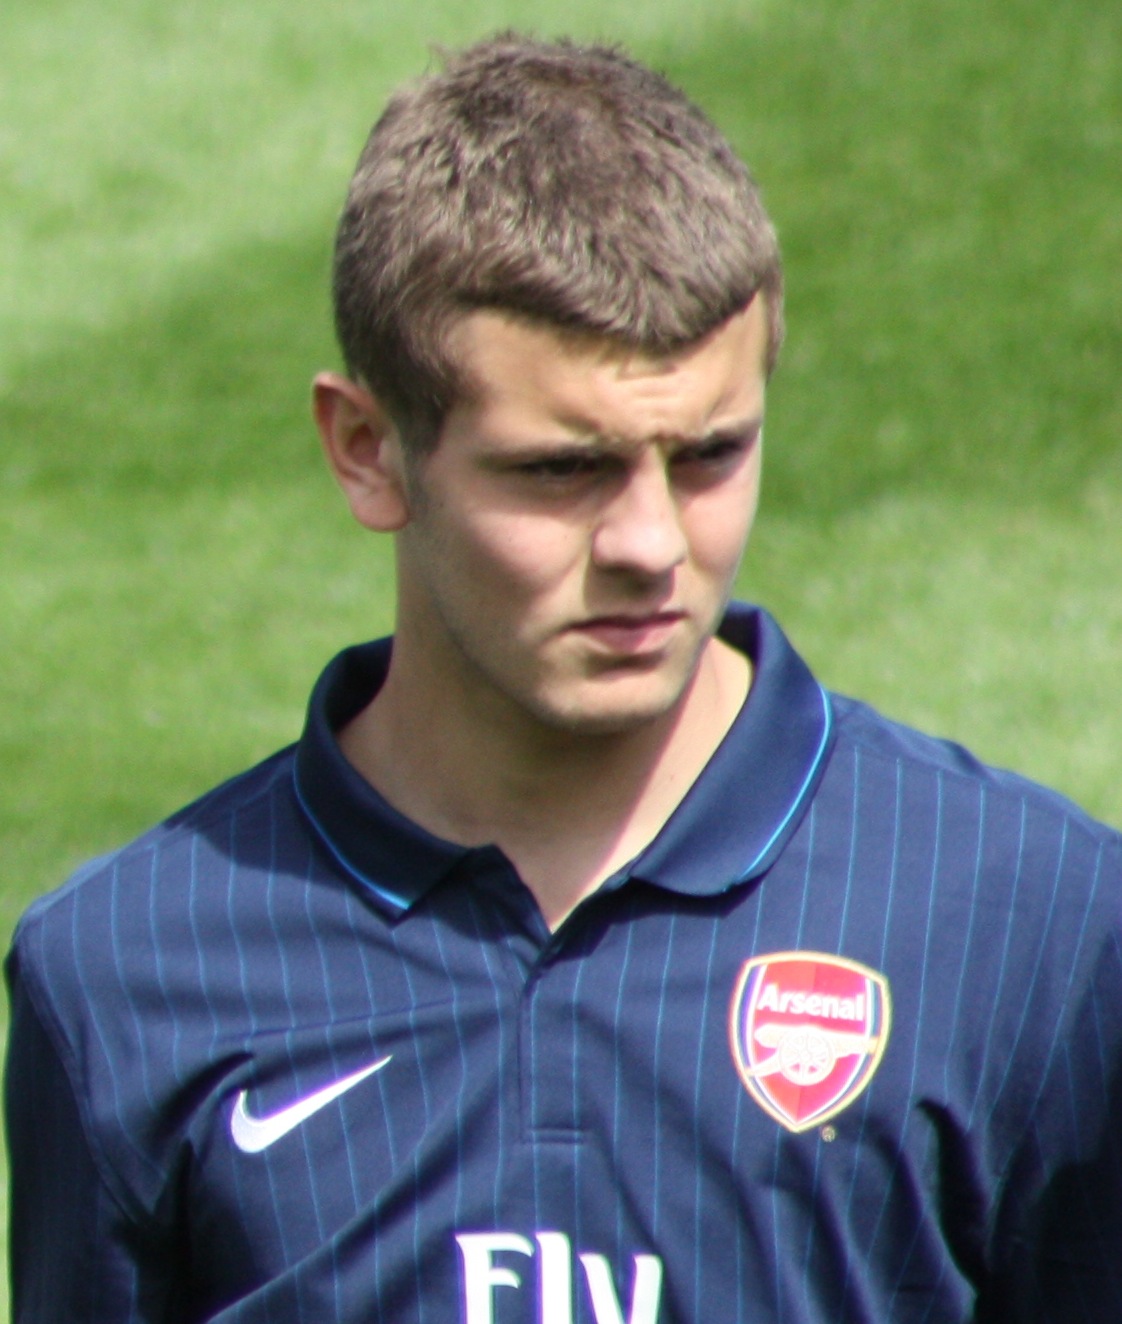 Jack Wilshere made his debut for Arsenal very young and has become a key member of Arsene Wenger's side in years that has passed by. (Photo courtesy: AFP/Getty)